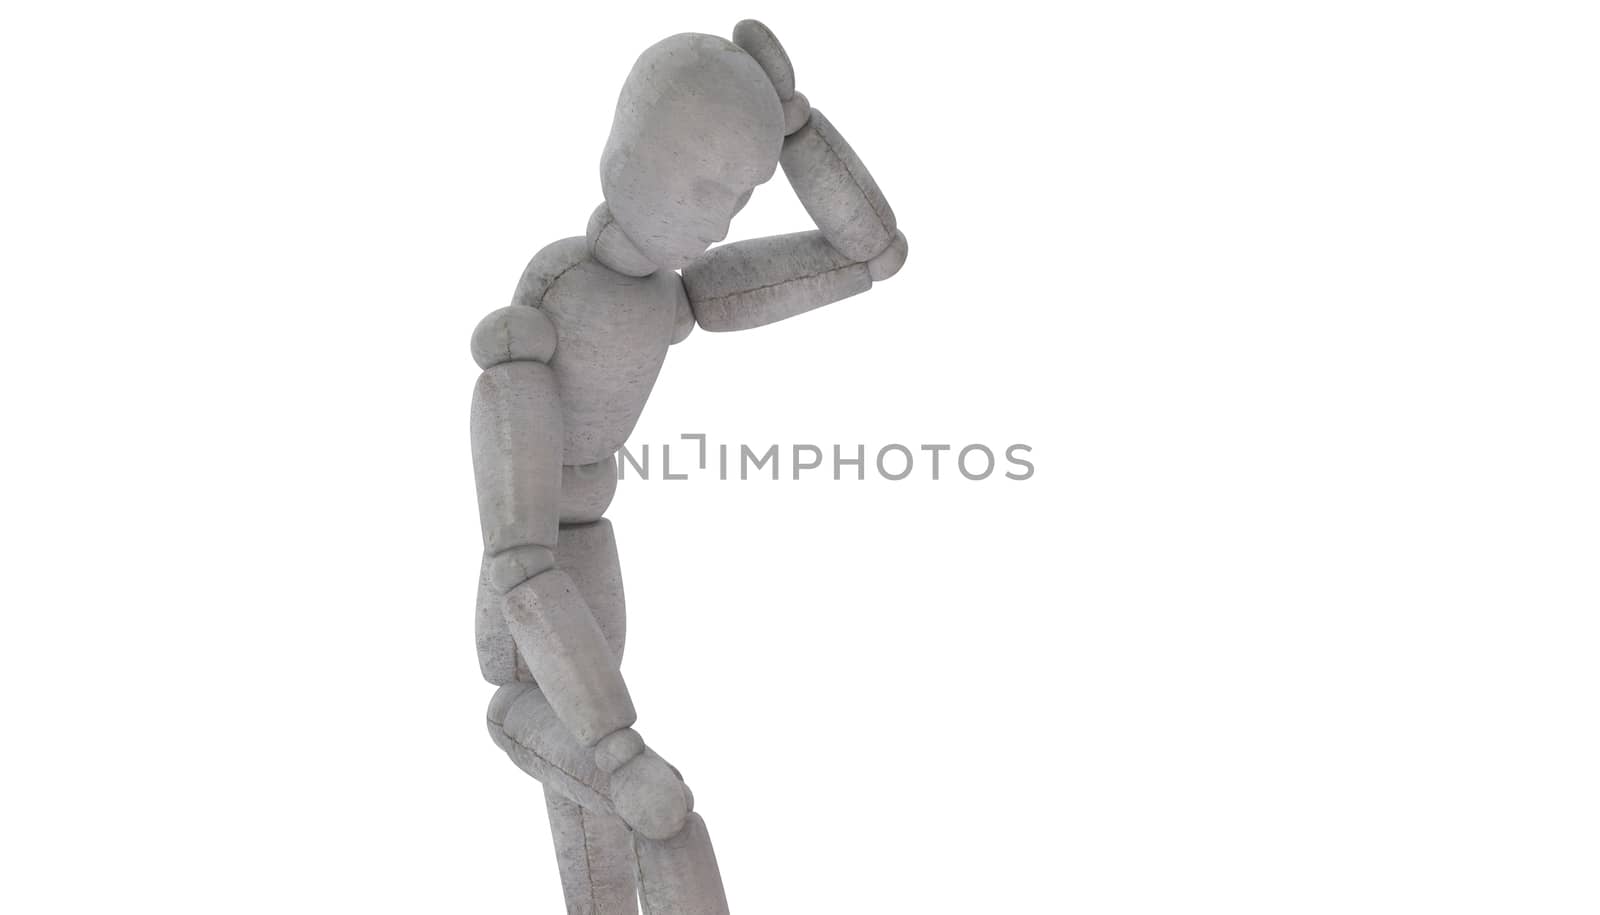 3d puppet model He stands and looks down at his feet, his left hand resting thoughtfully on his head and does not know how to meet the challenge